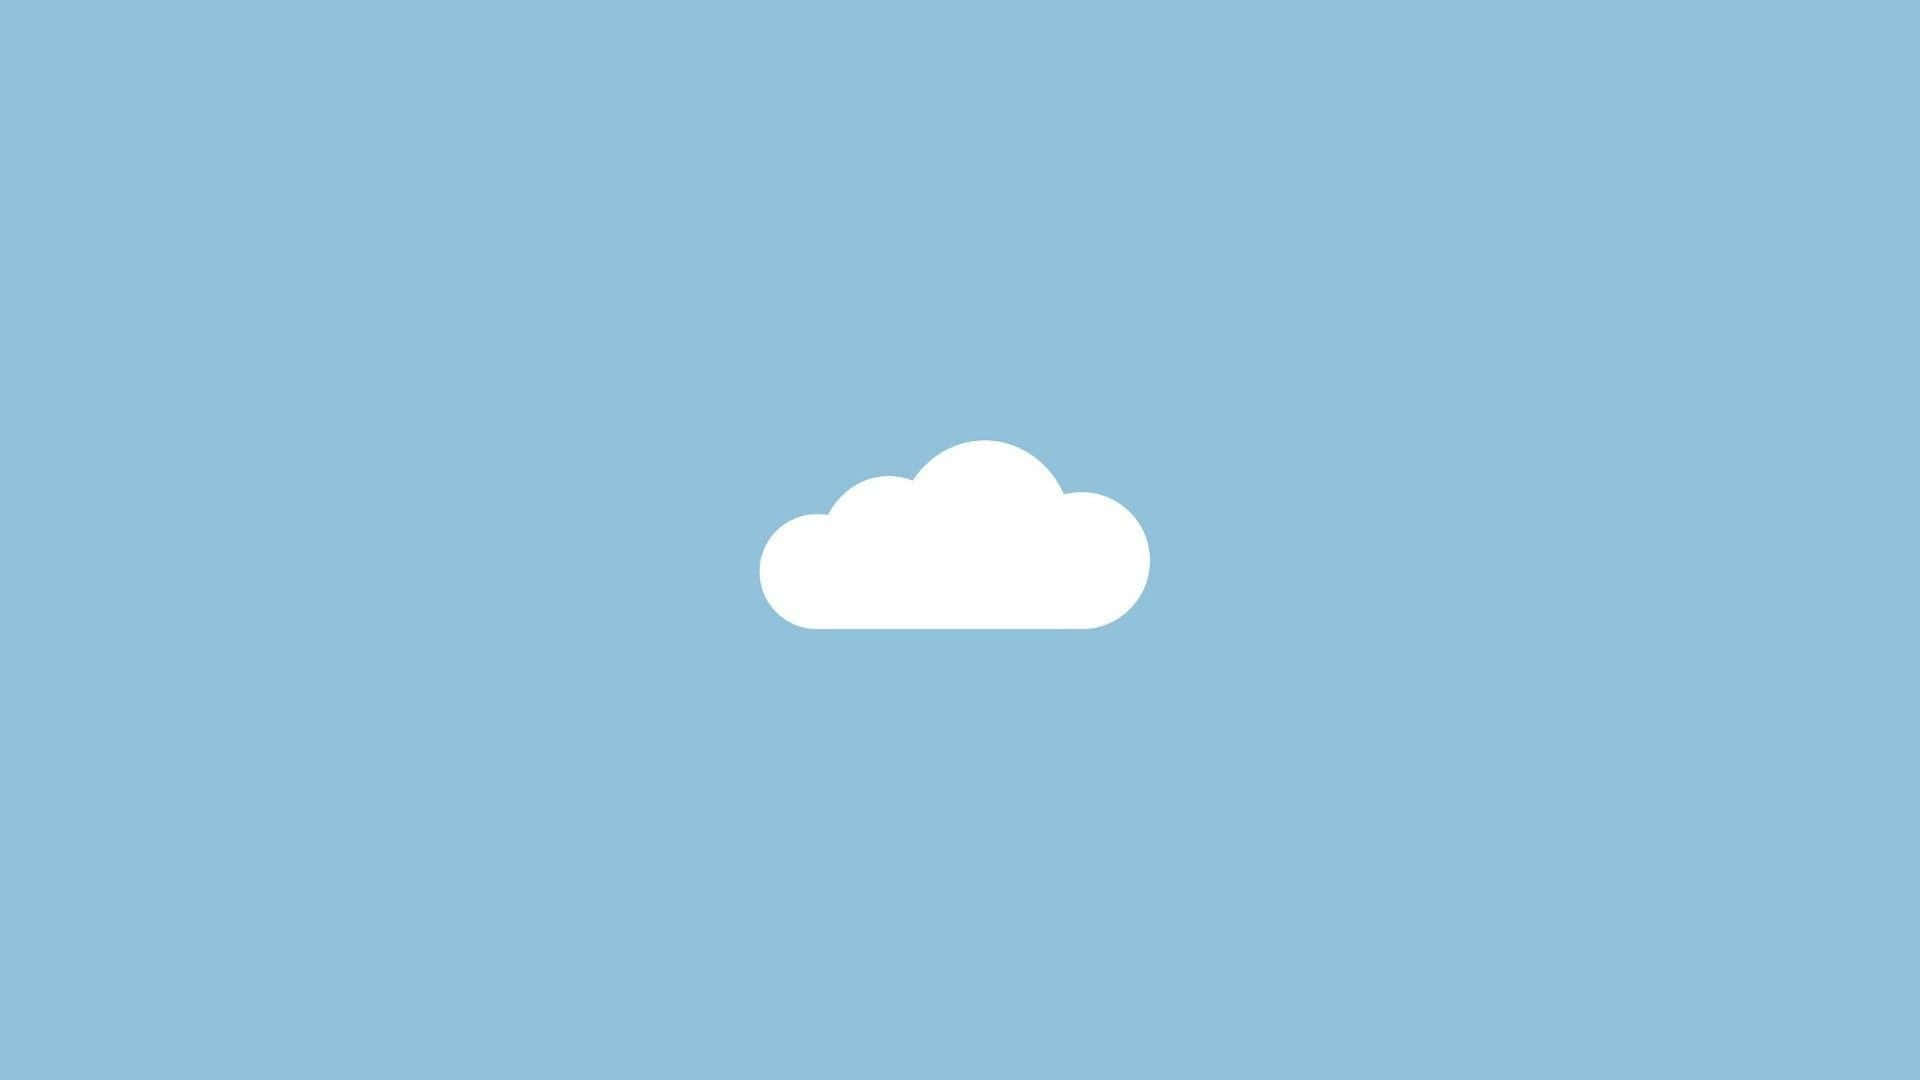 A calming blue pastel background sanding out against a vibrant cerulean sky